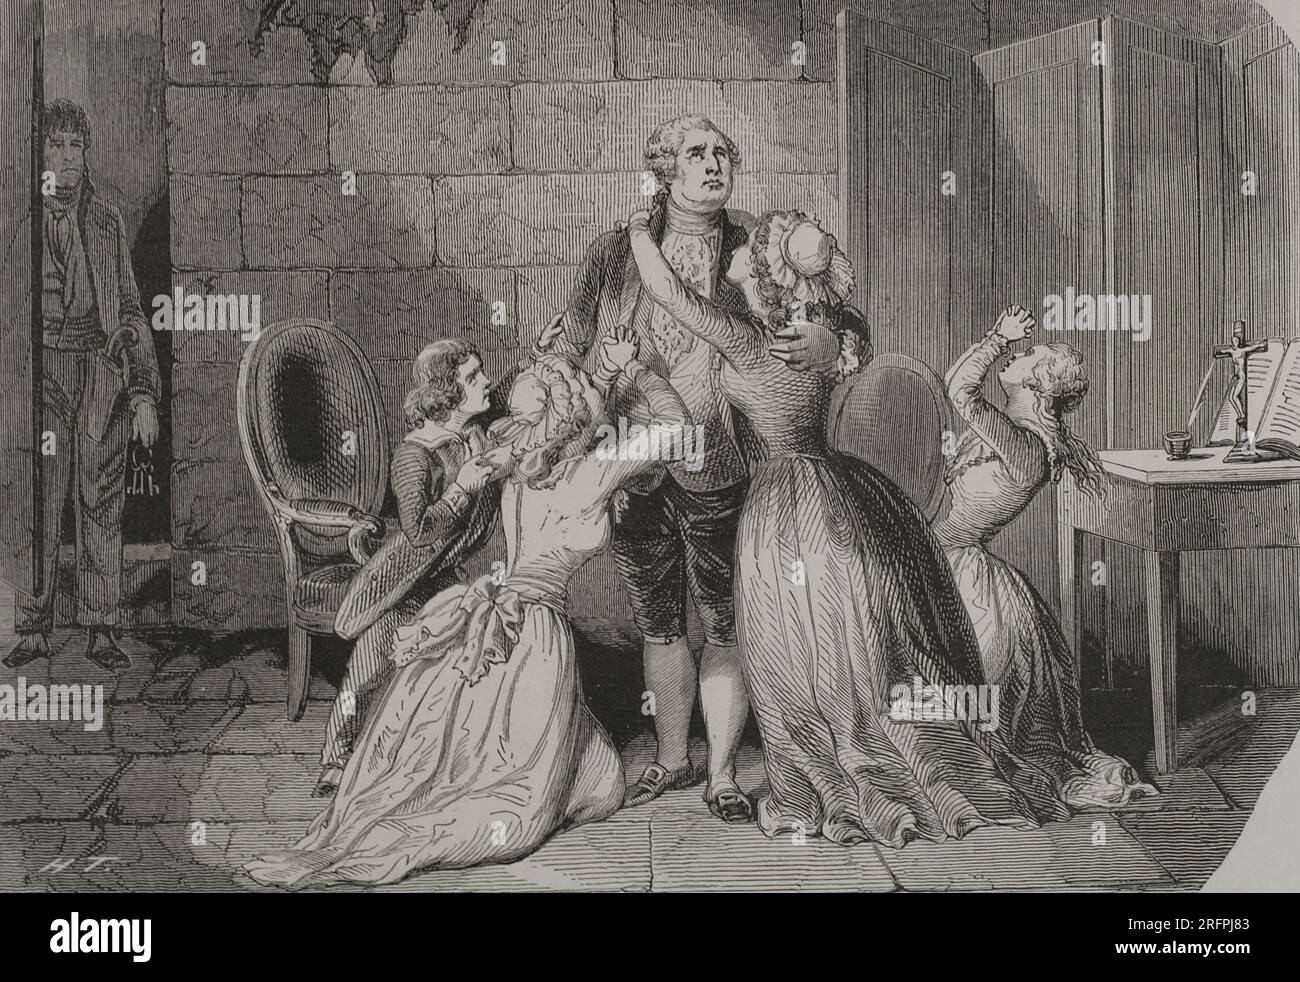 Louis XVI (1754-1793). King of France (1774-1792). In 1770 he married Marie-Antoinette. Louis XVI farewells his wife and children on the night of 20 January 1793. On the following morning he was guillotined on a gallows installed in the Place de la Révolution in Paris. Engraving. 'Los Héroes y las Grandezas de la Tierra'. Volume V. 1855 Stock Photo